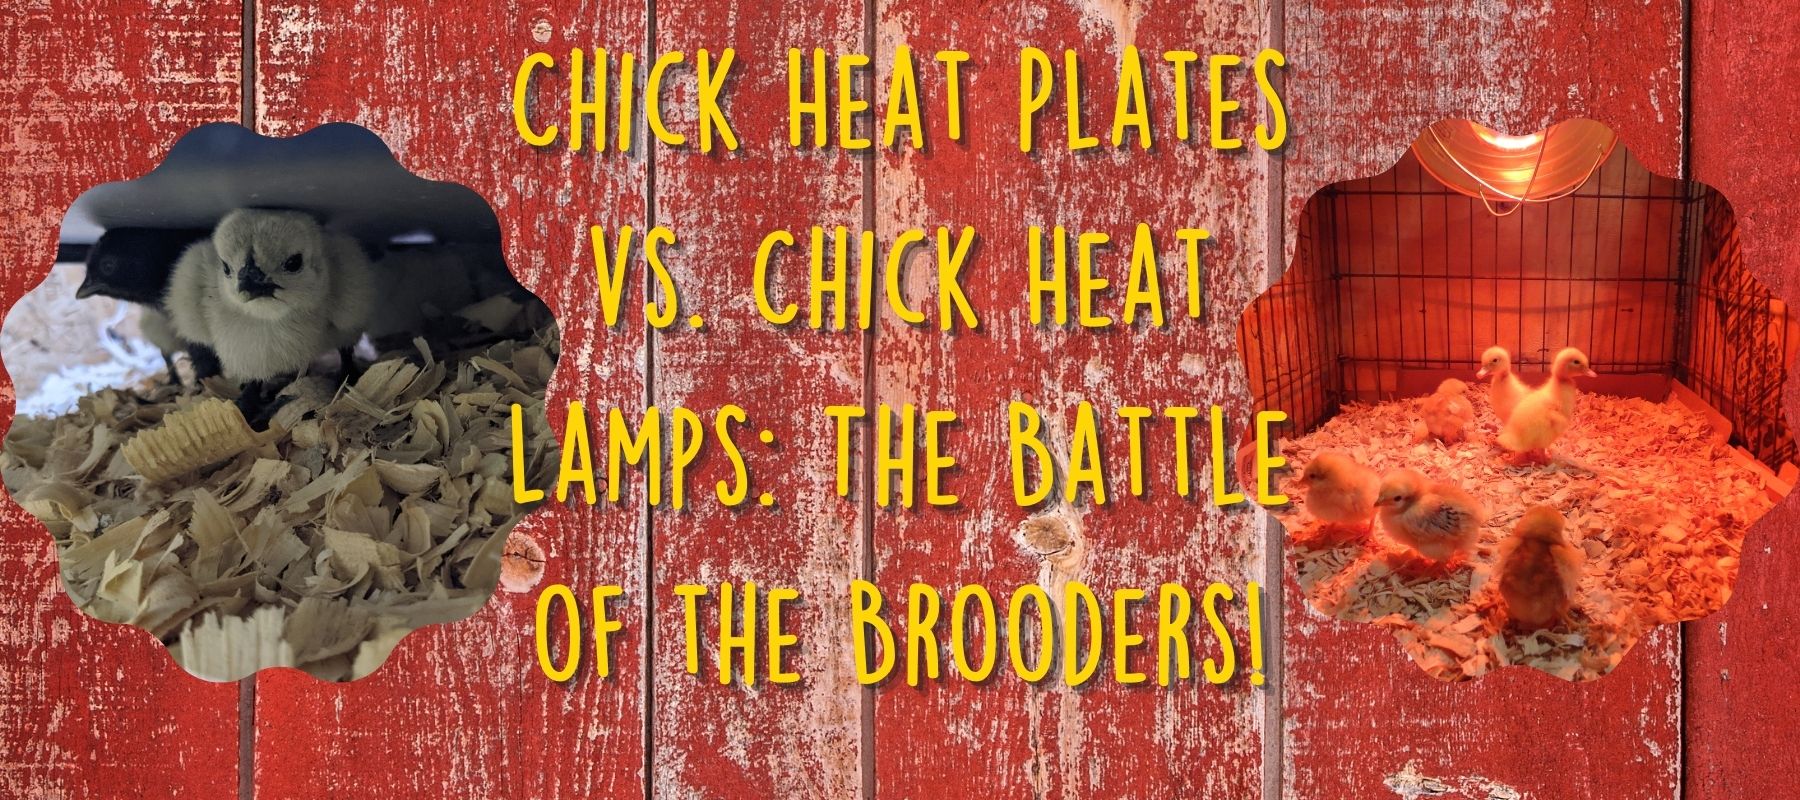 Chick Heat Plates vs. Chick Heat Lamps: The Battle of the Brooders!